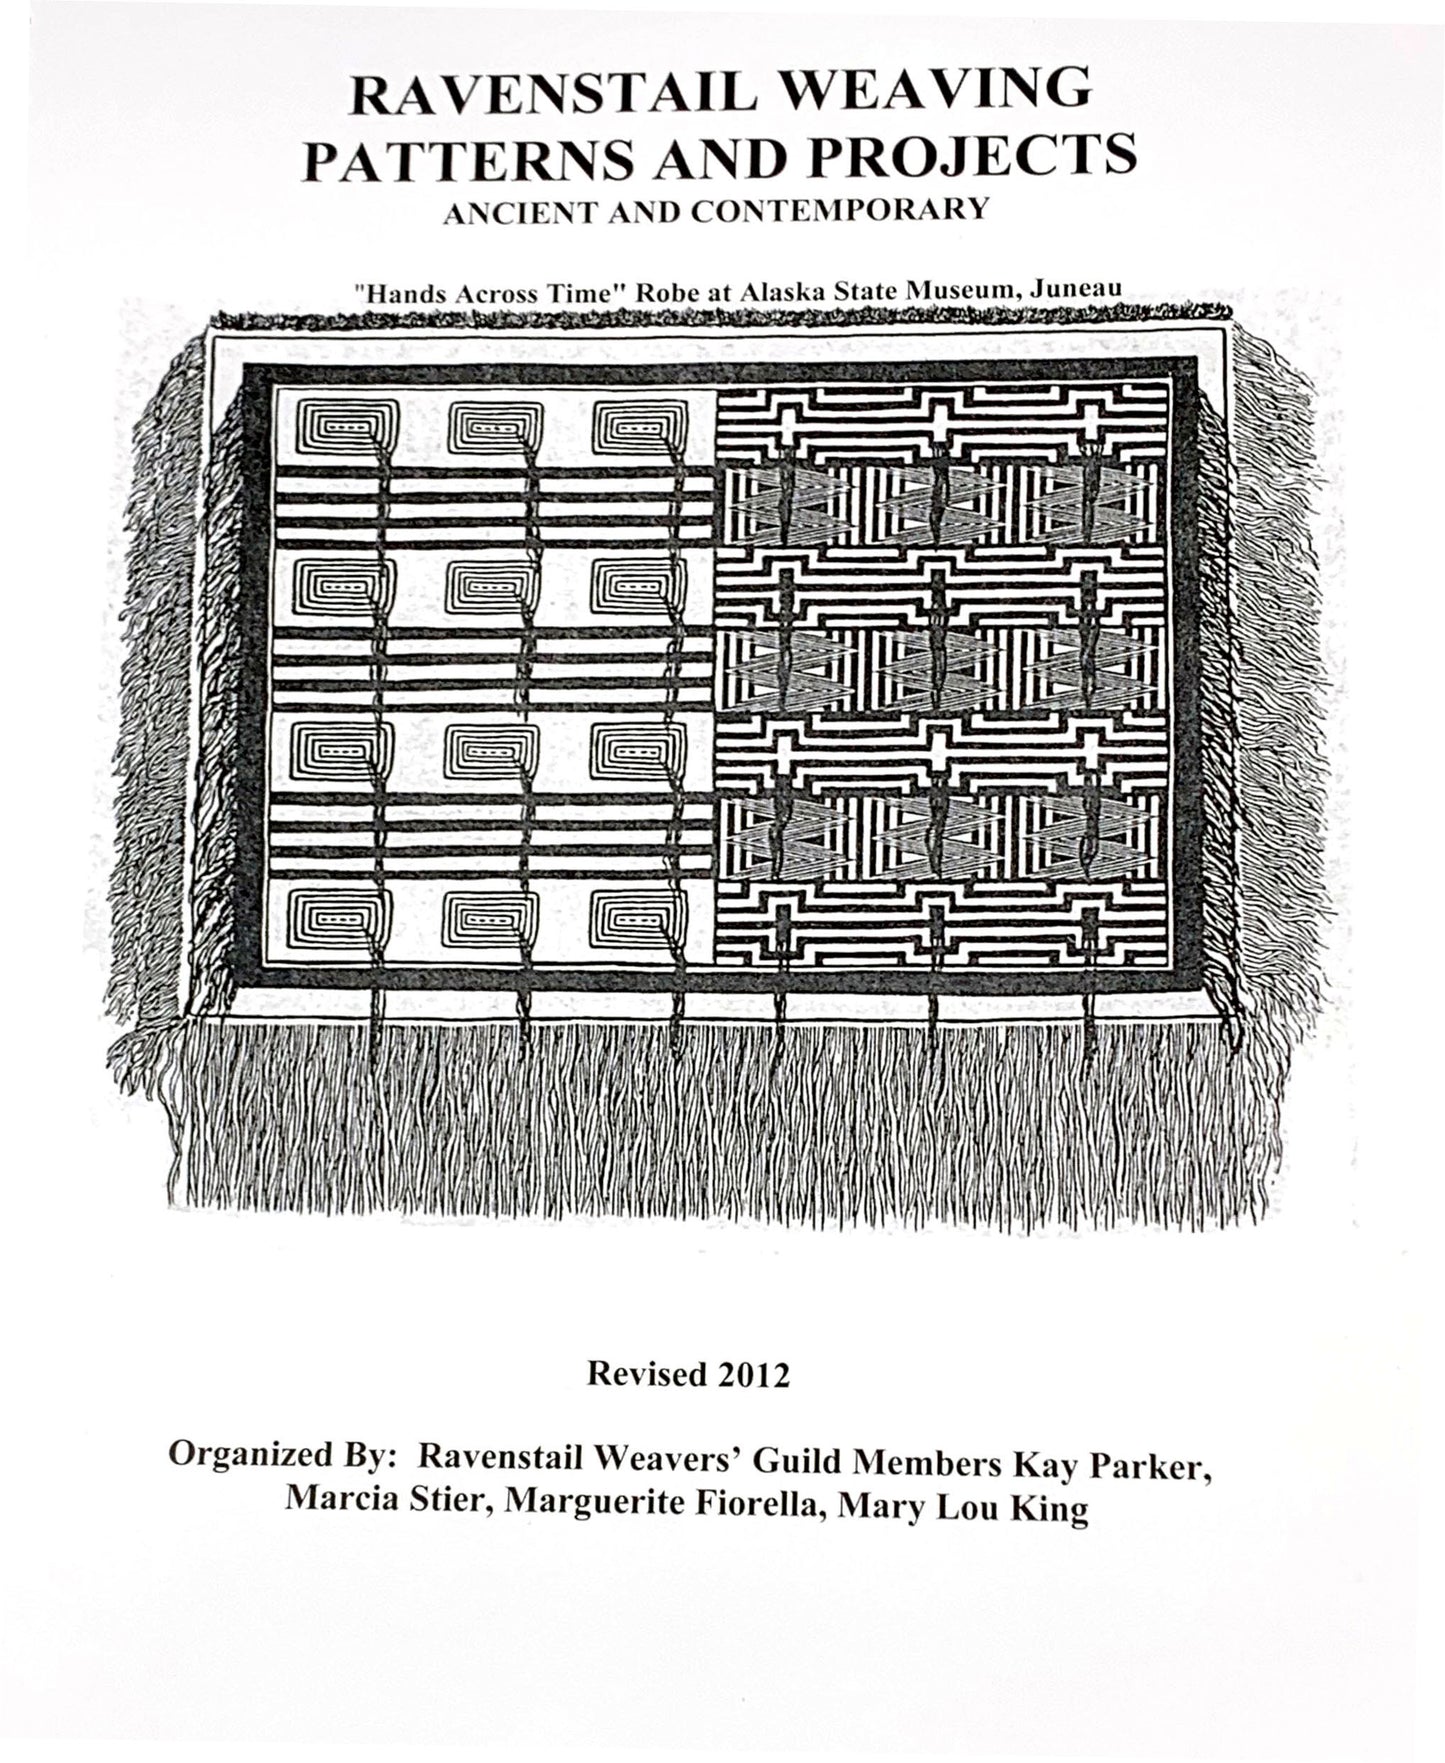 Book- Parker; "Ravenstail Weaving Patterns and Projects Ancient and Contemporary"